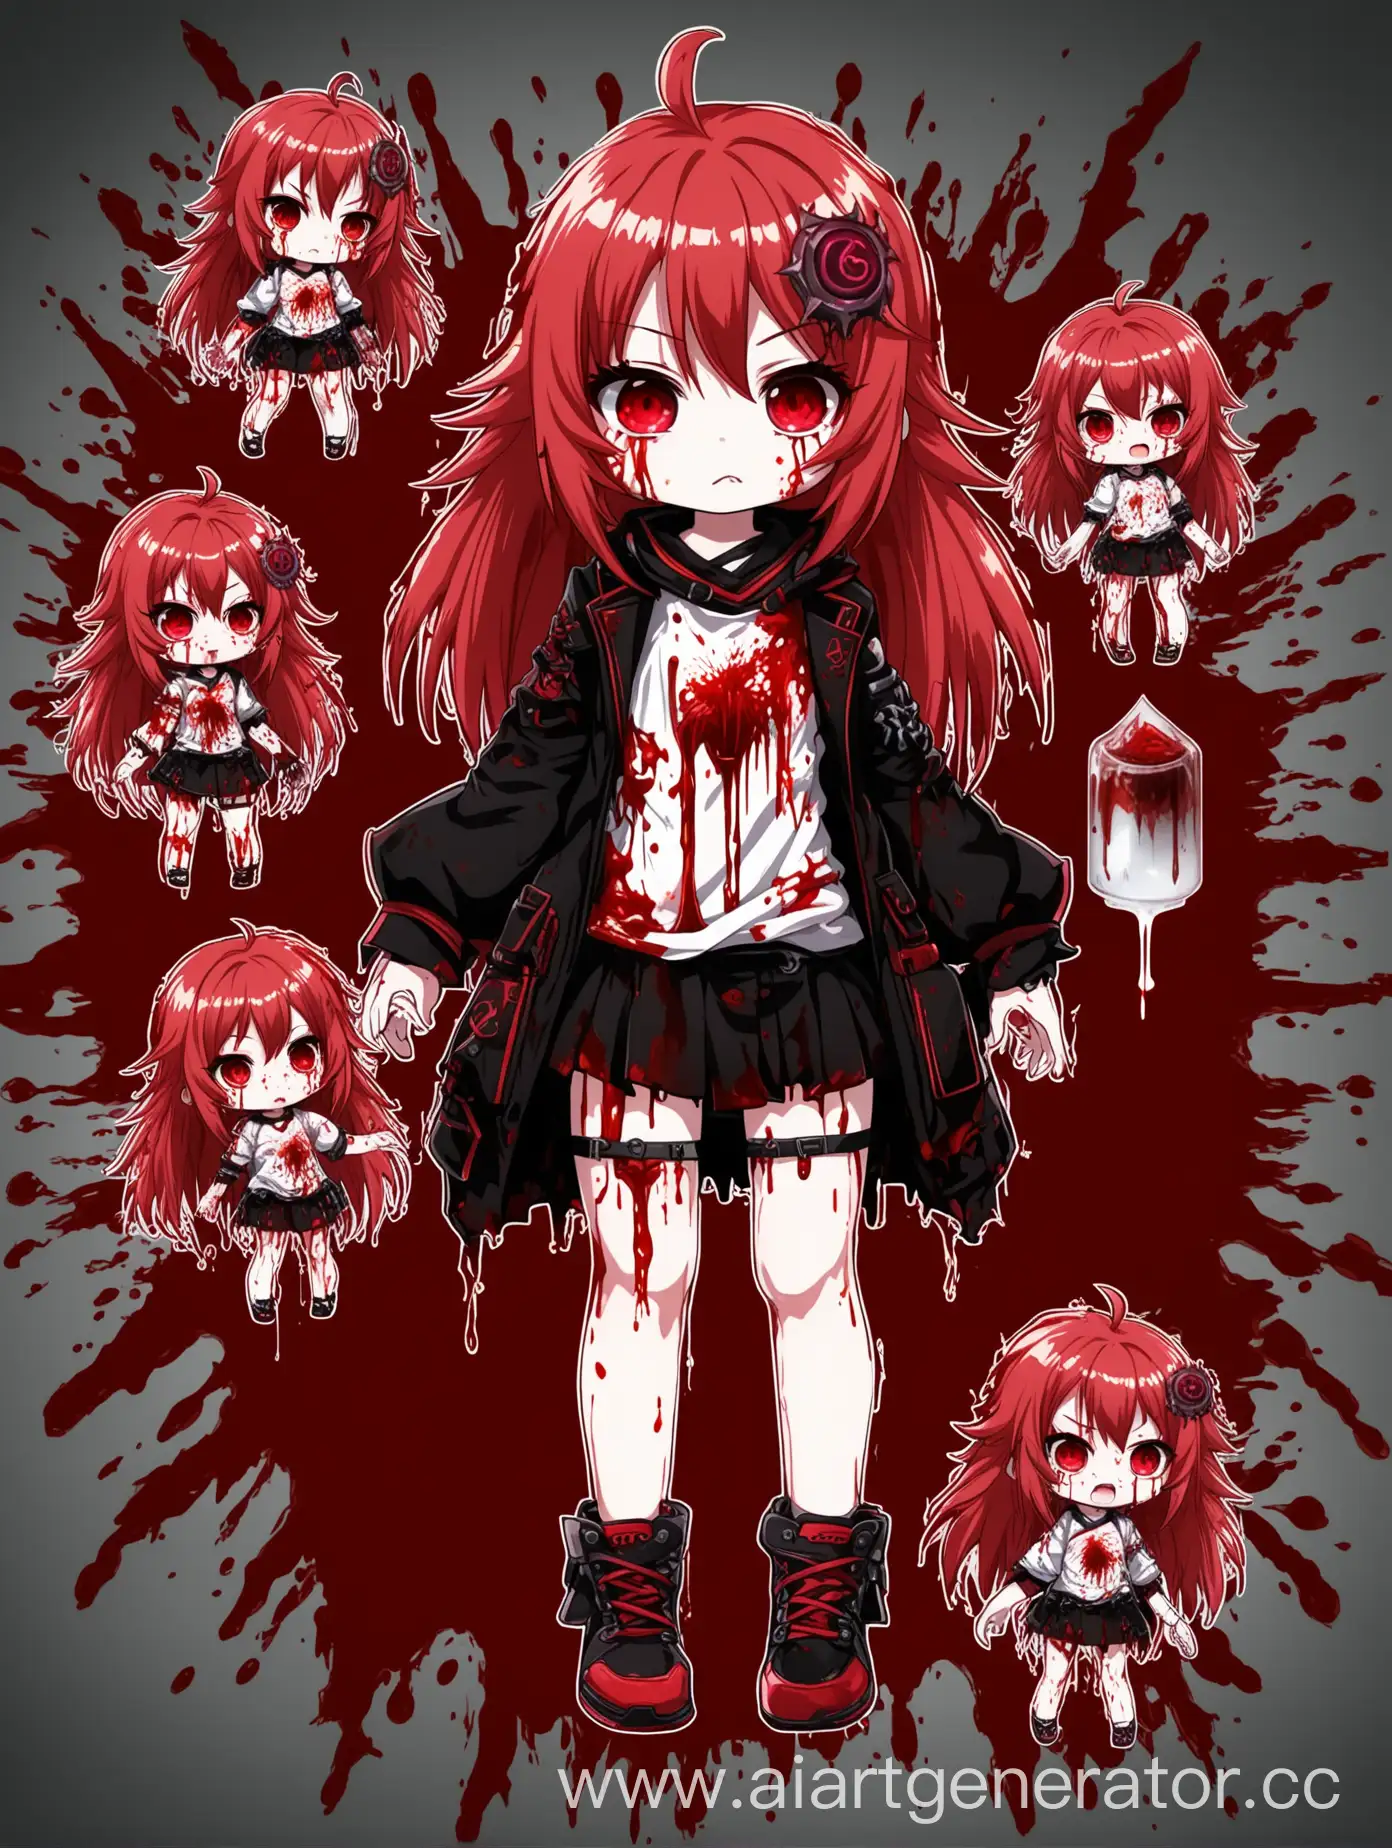 Anime-Chibi-Girl-in-Dream-Core-with-Blood-Details